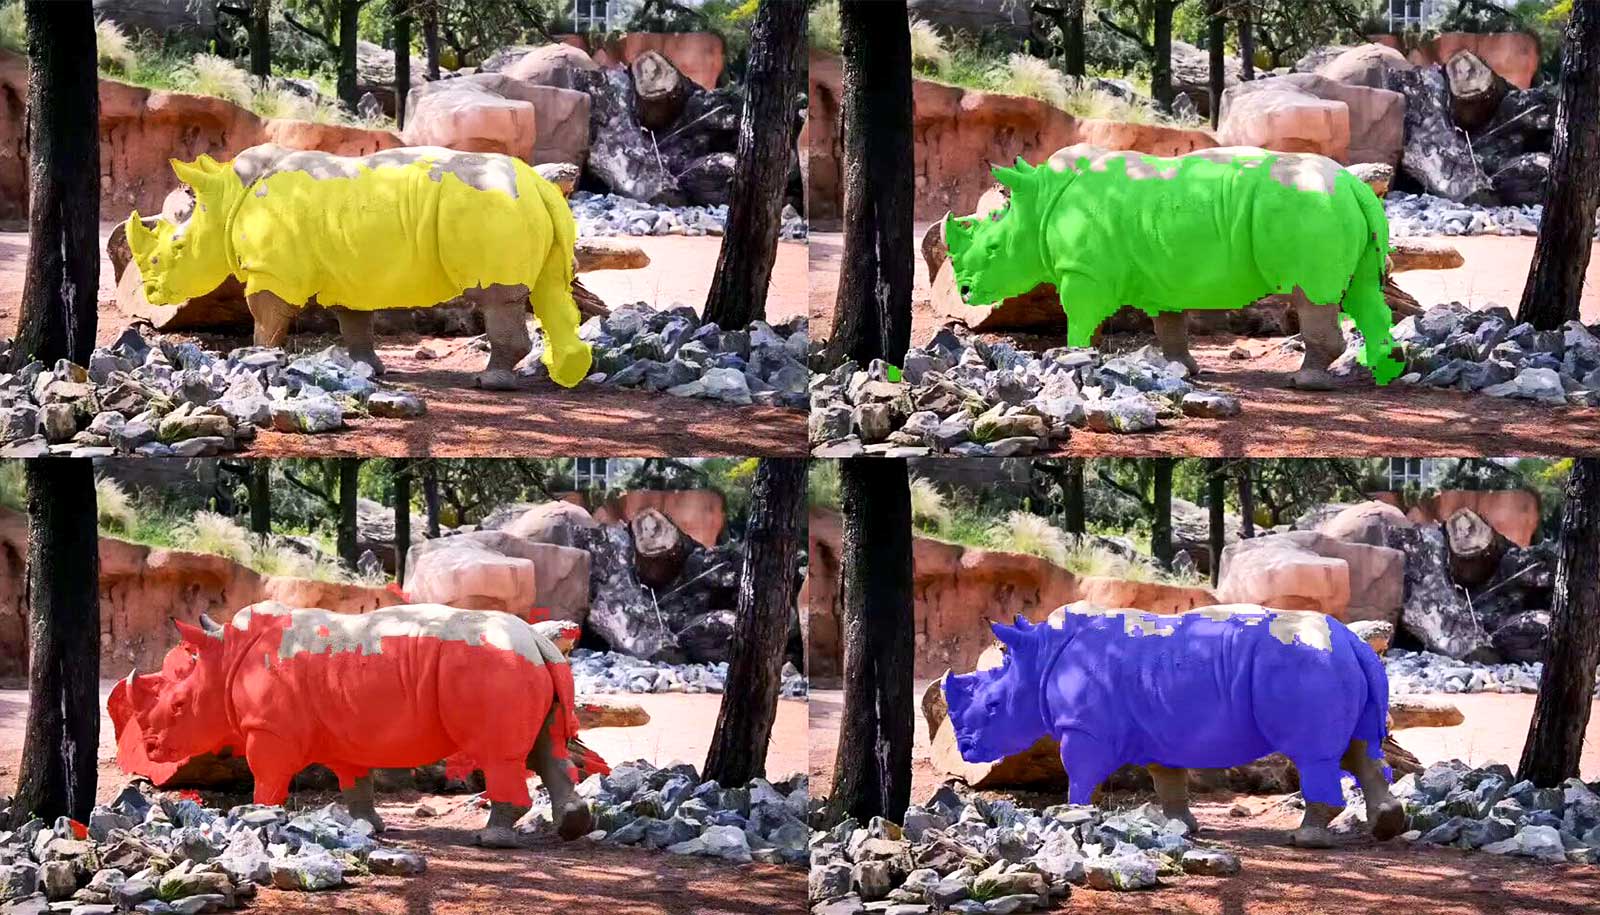 These four frames show how a video object segmentation algorithm performs